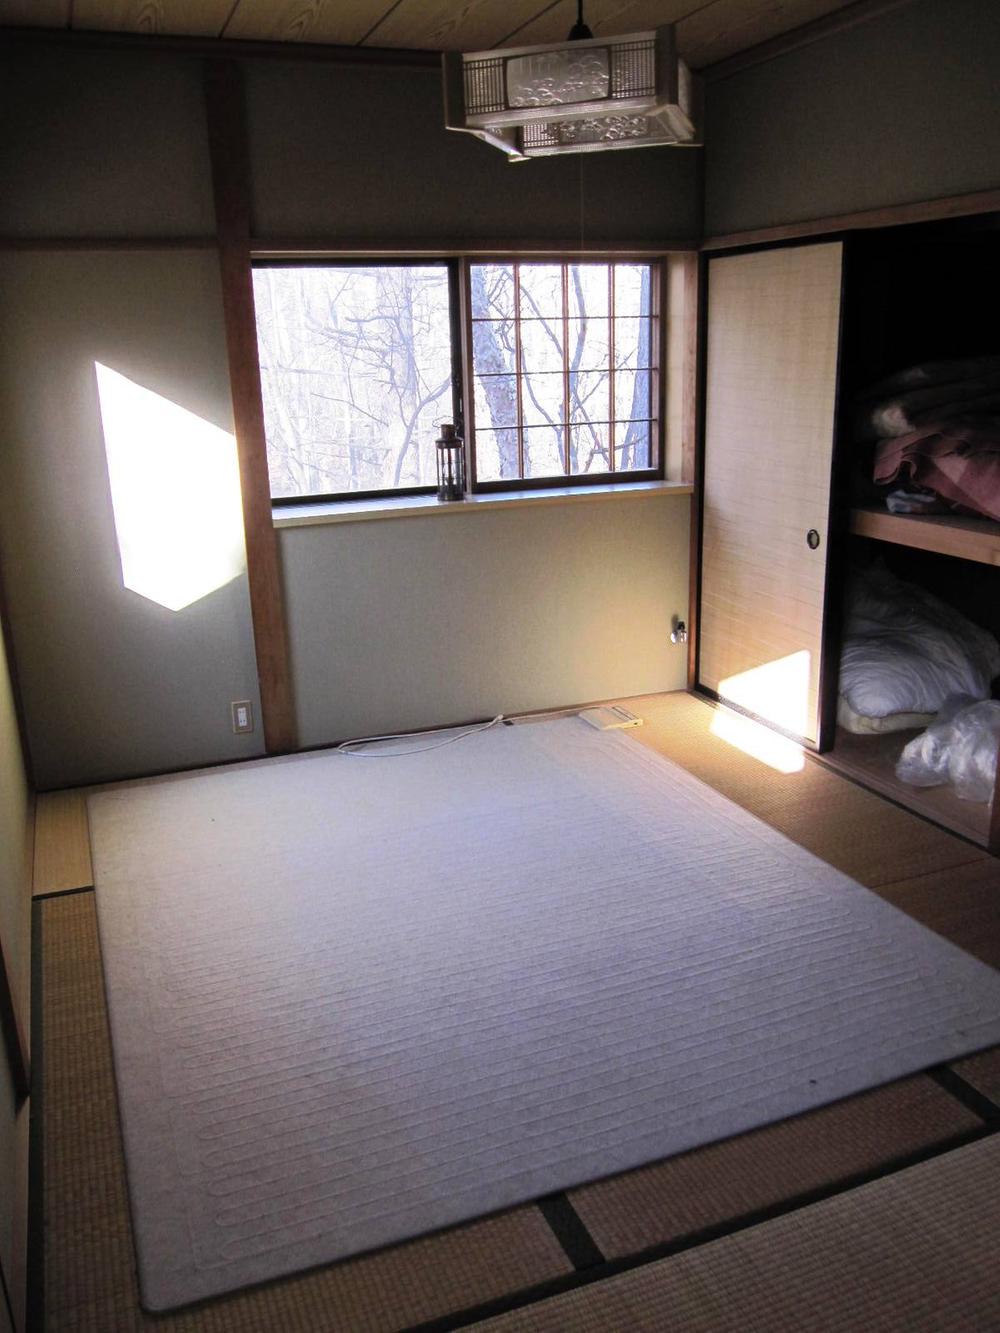 Non-living room. The second floor Japanese-style room (6 quires)